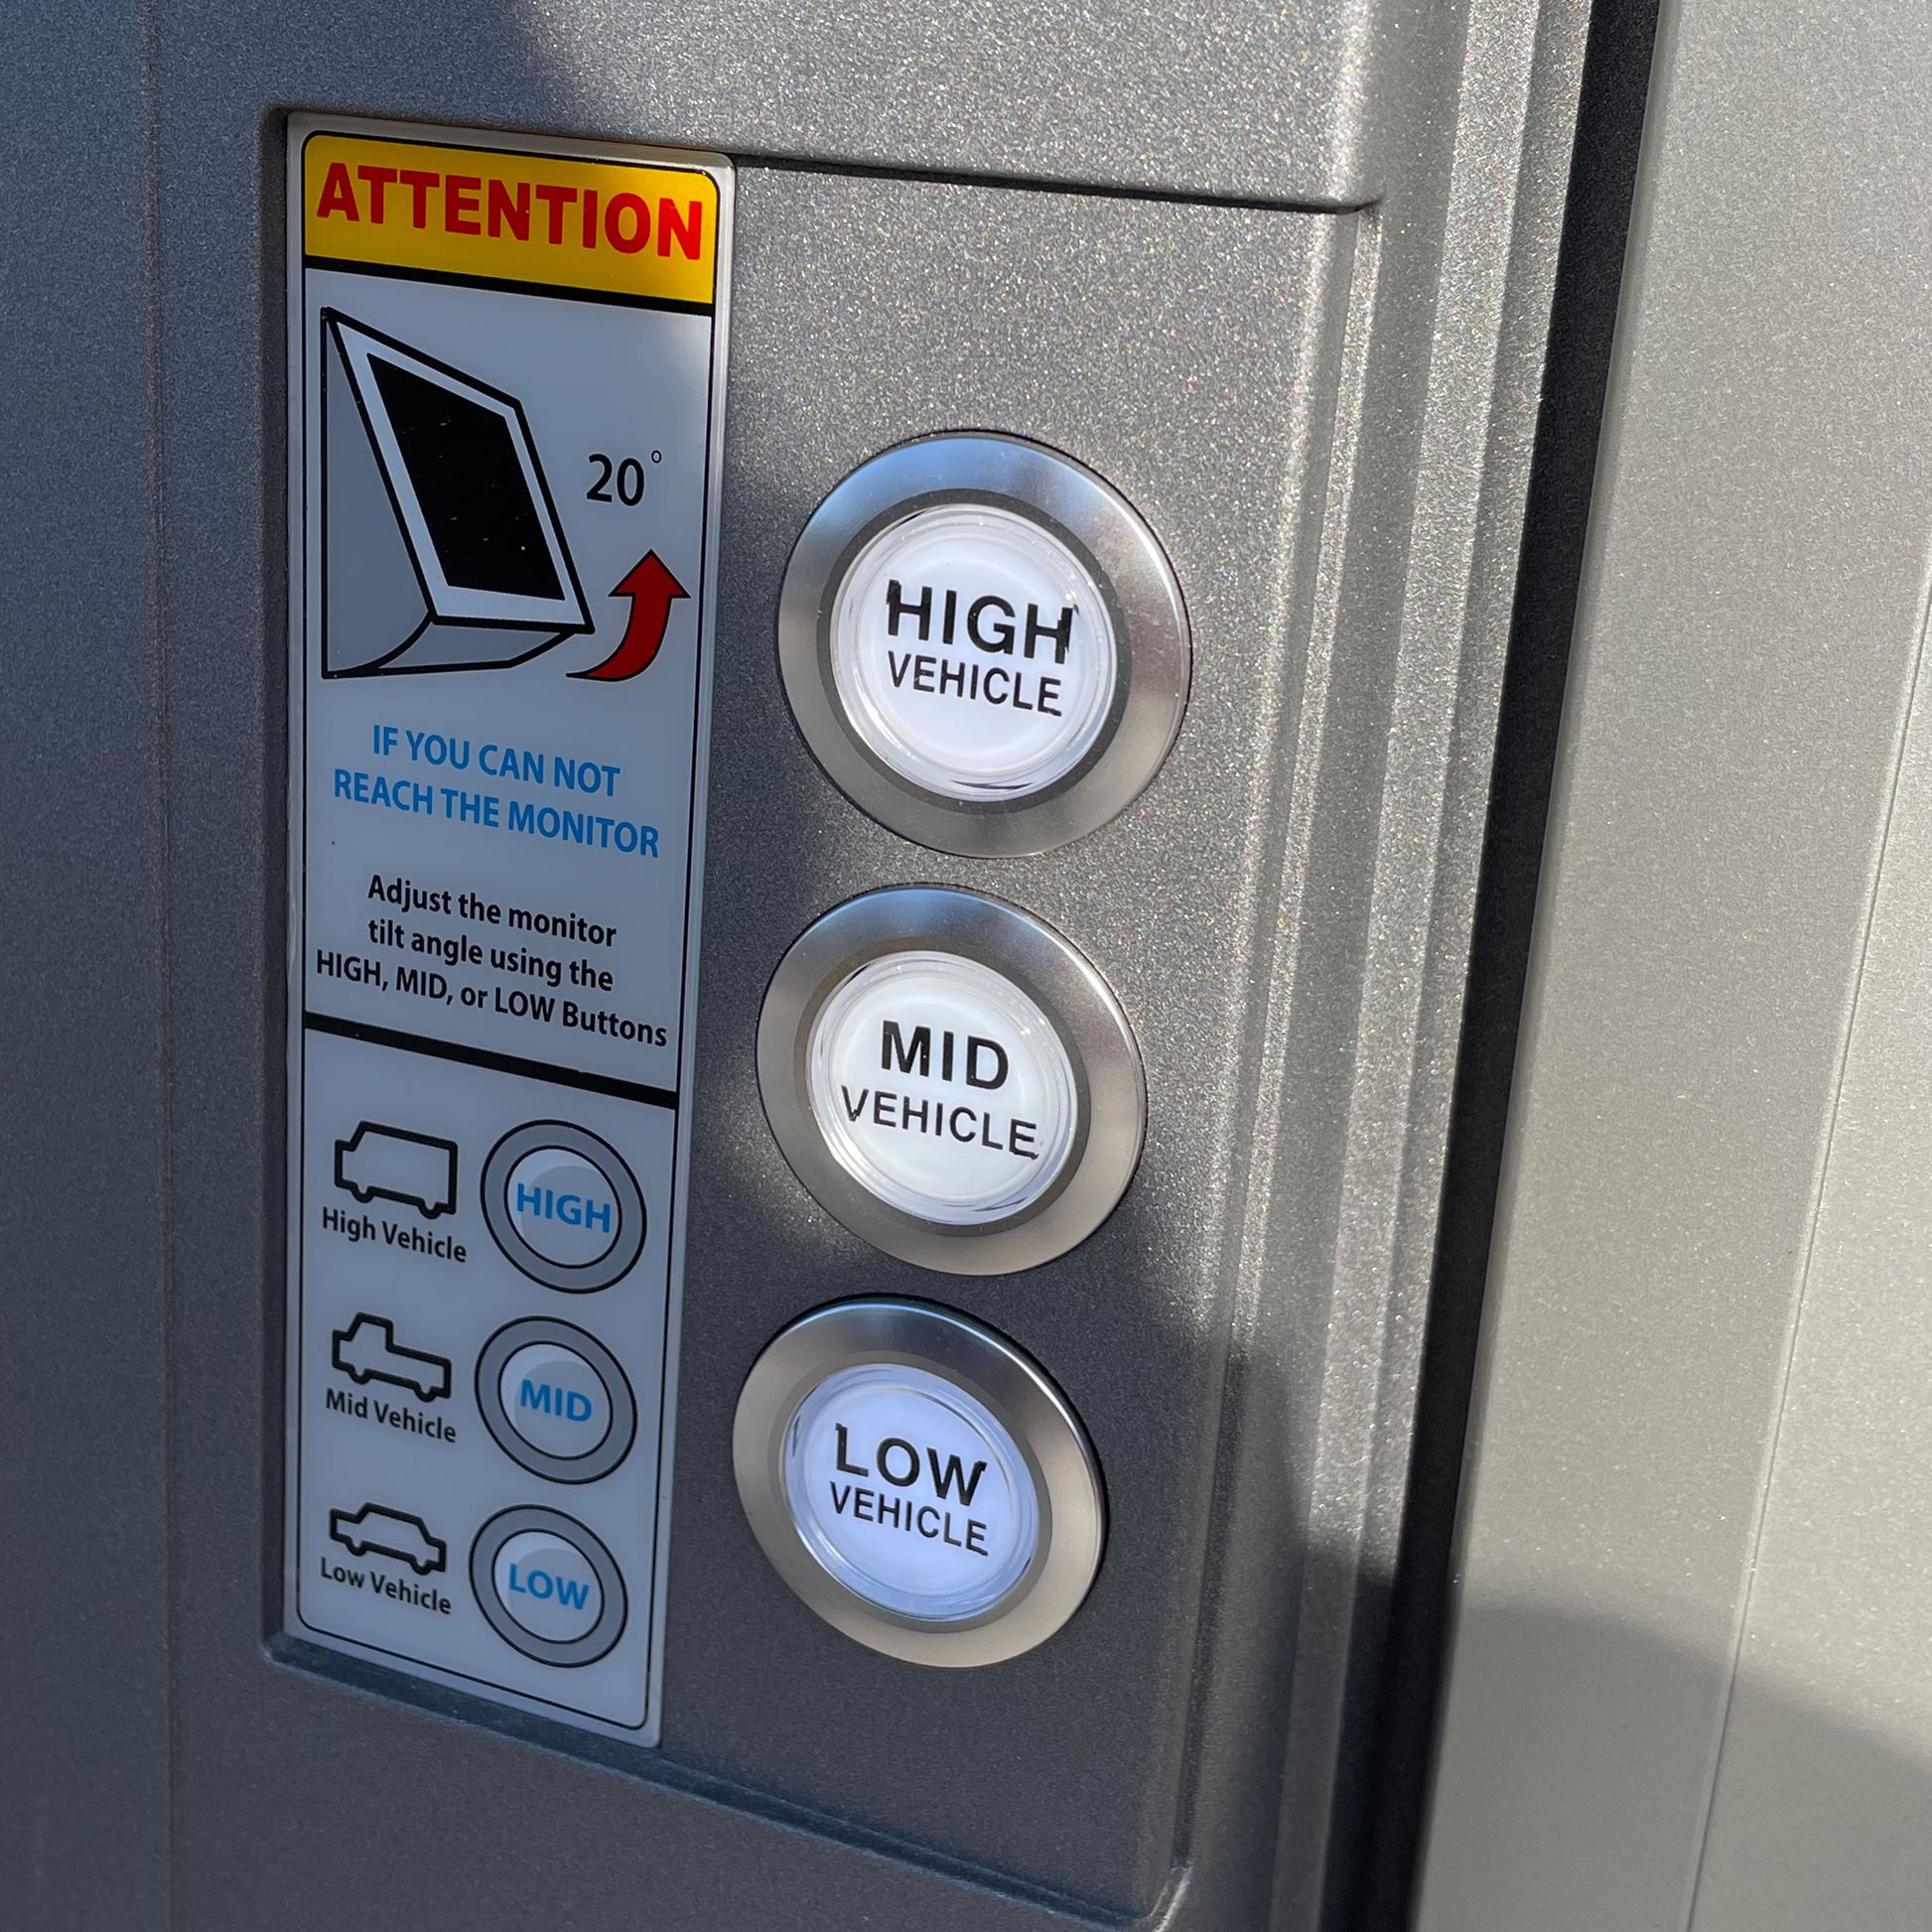 Adjust the tilt angle using the High, Mid, or Low button. Commonly found on a NH7600i ATM.